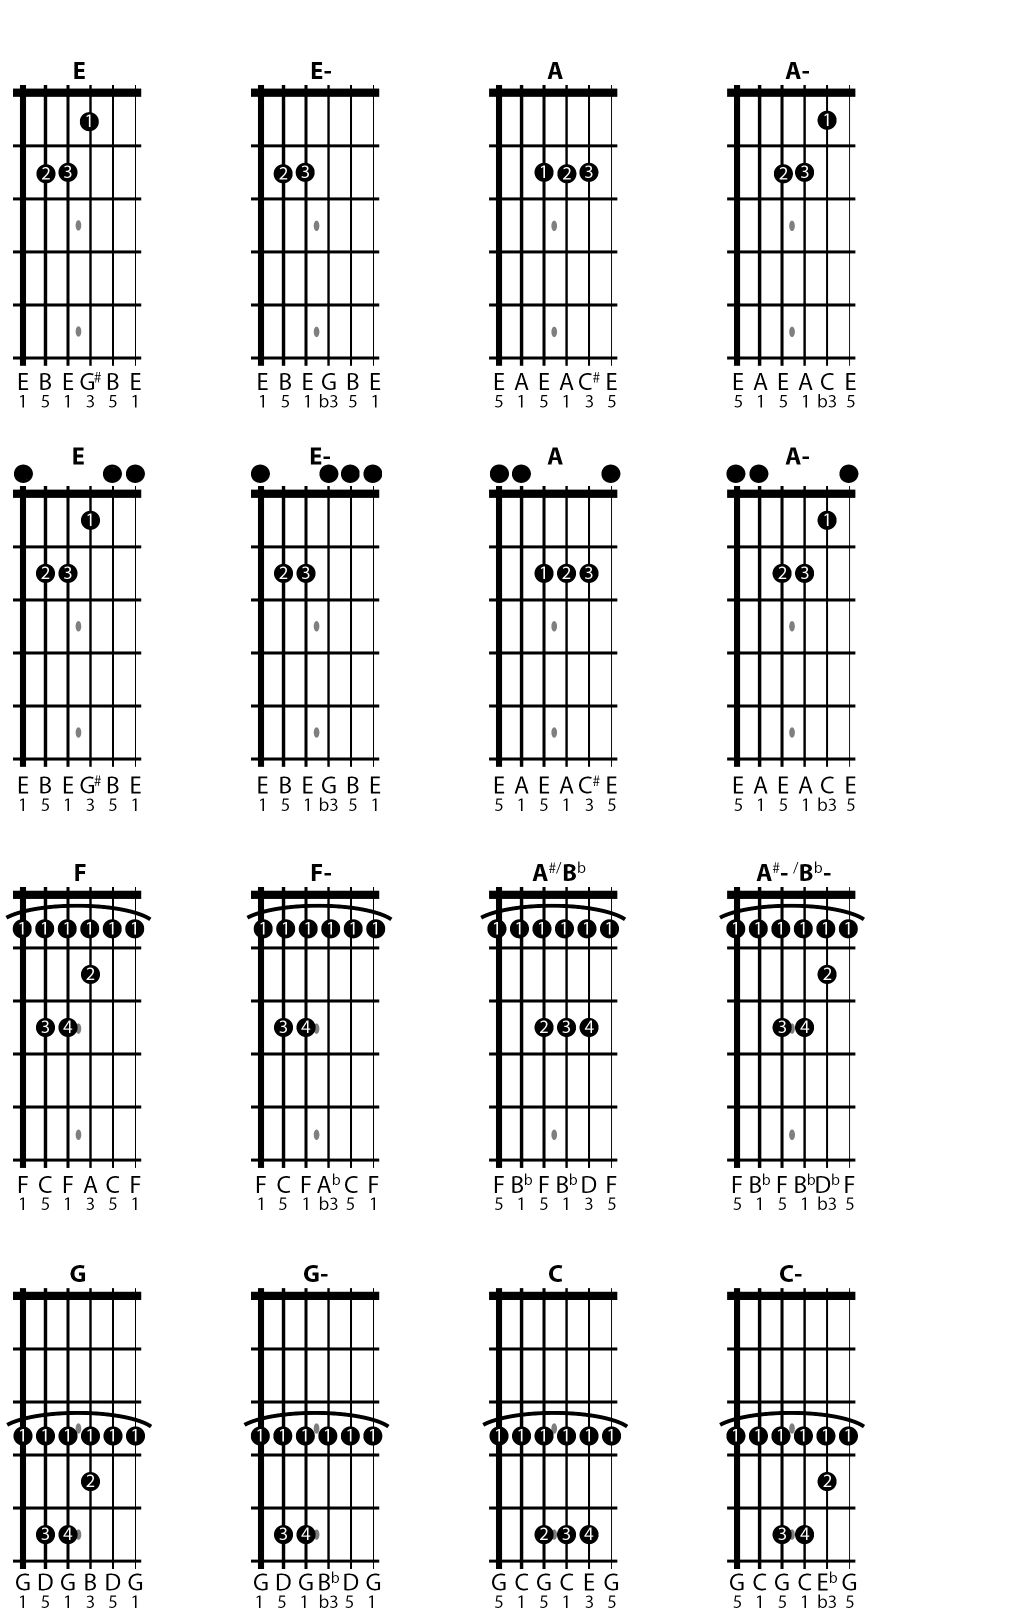 The complete study of bar chords on a guitar